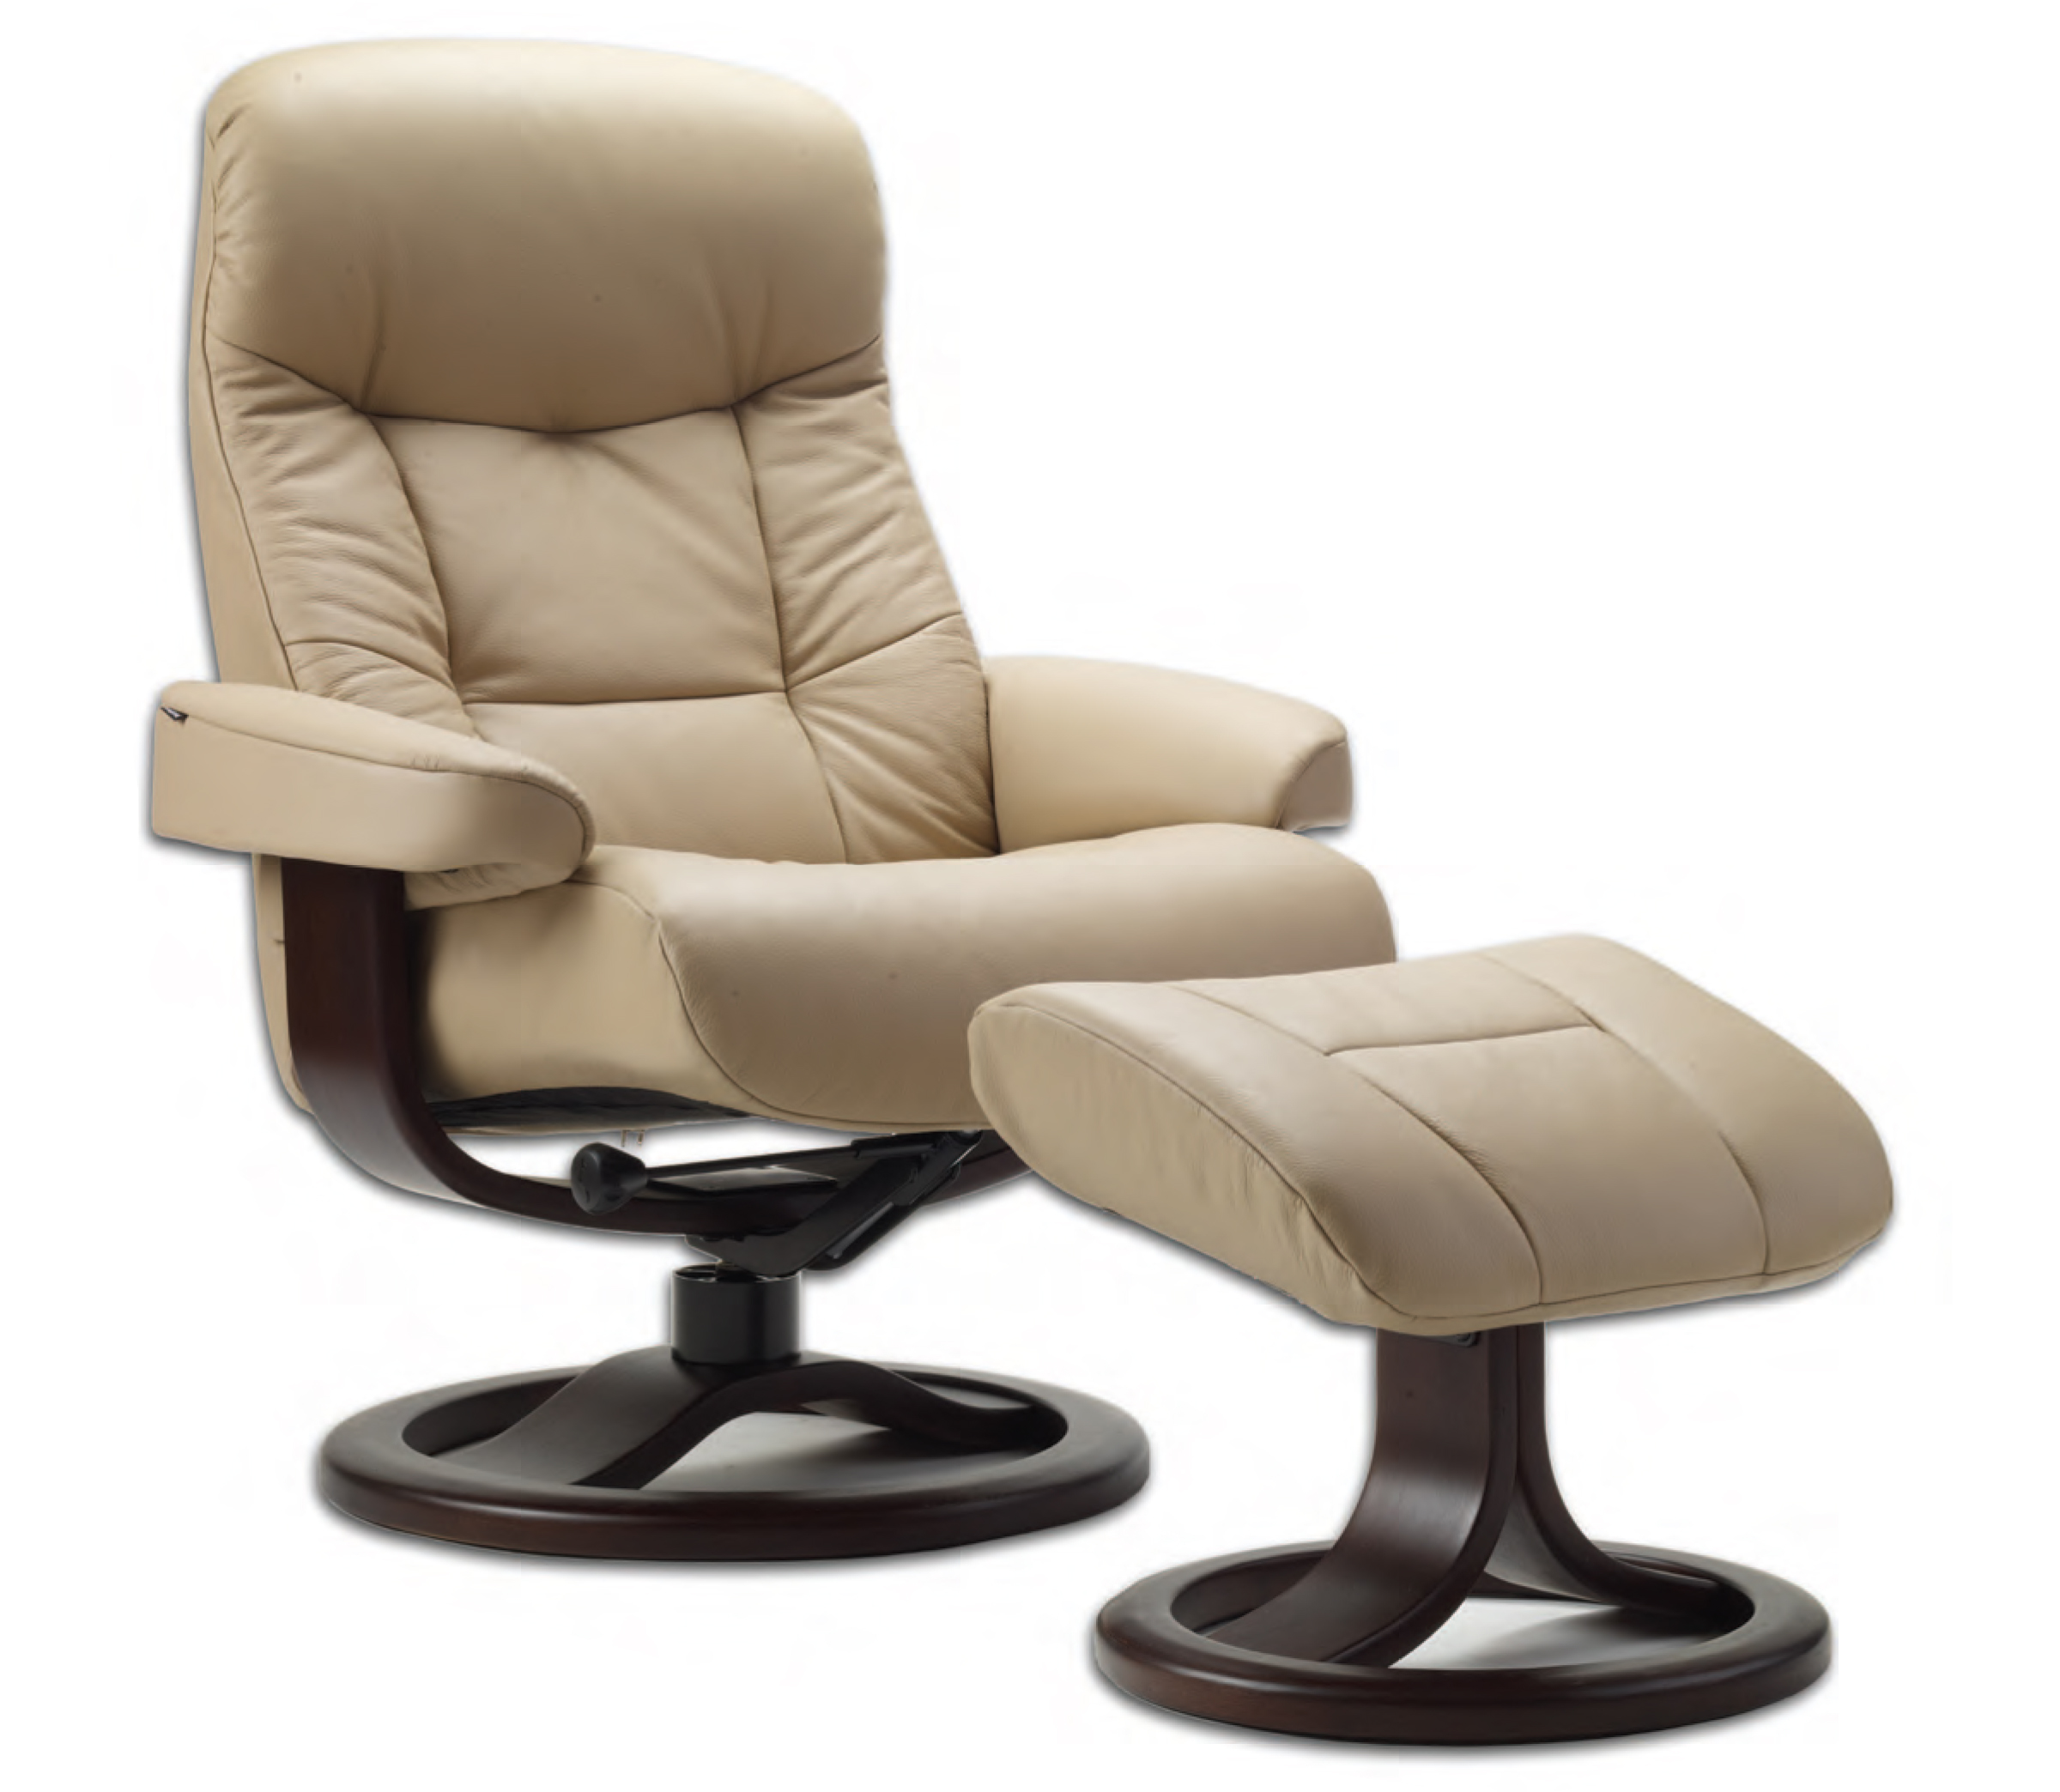 Fjords 215 Muldal Ergonomic Leather Recliner Chair ...